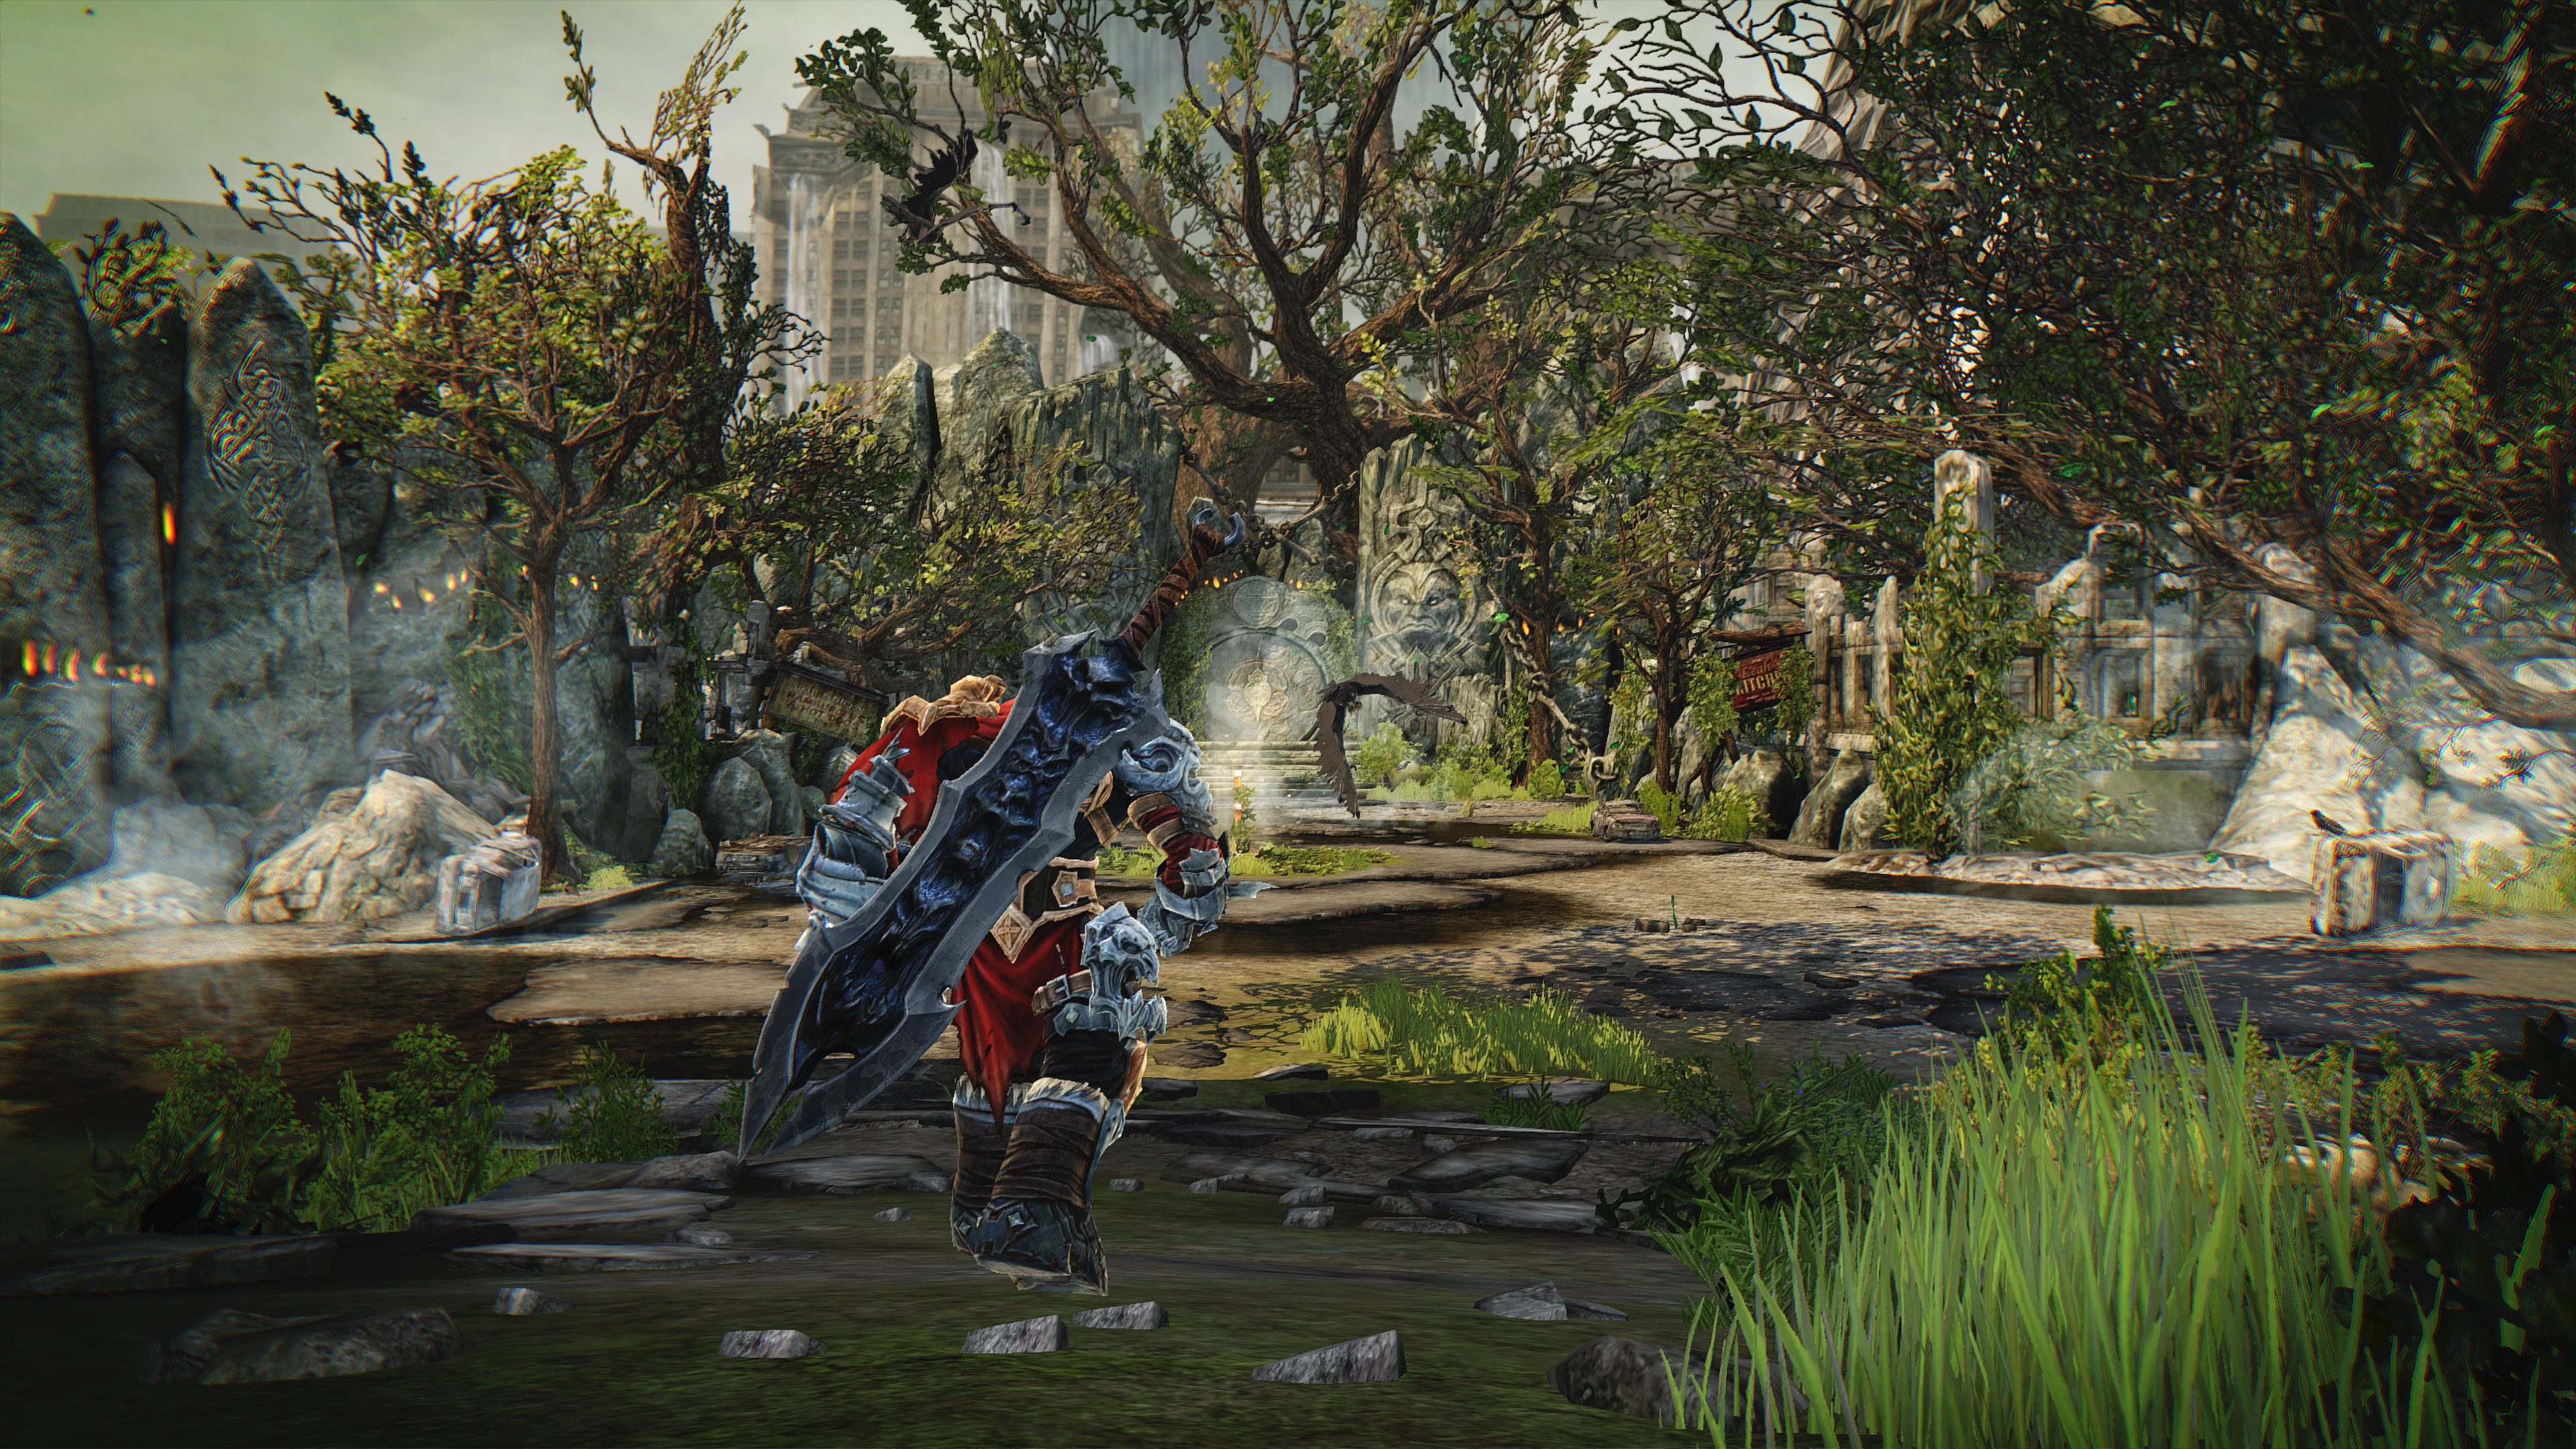 Darksiders Warmastered Edition hits Nintendo Switch